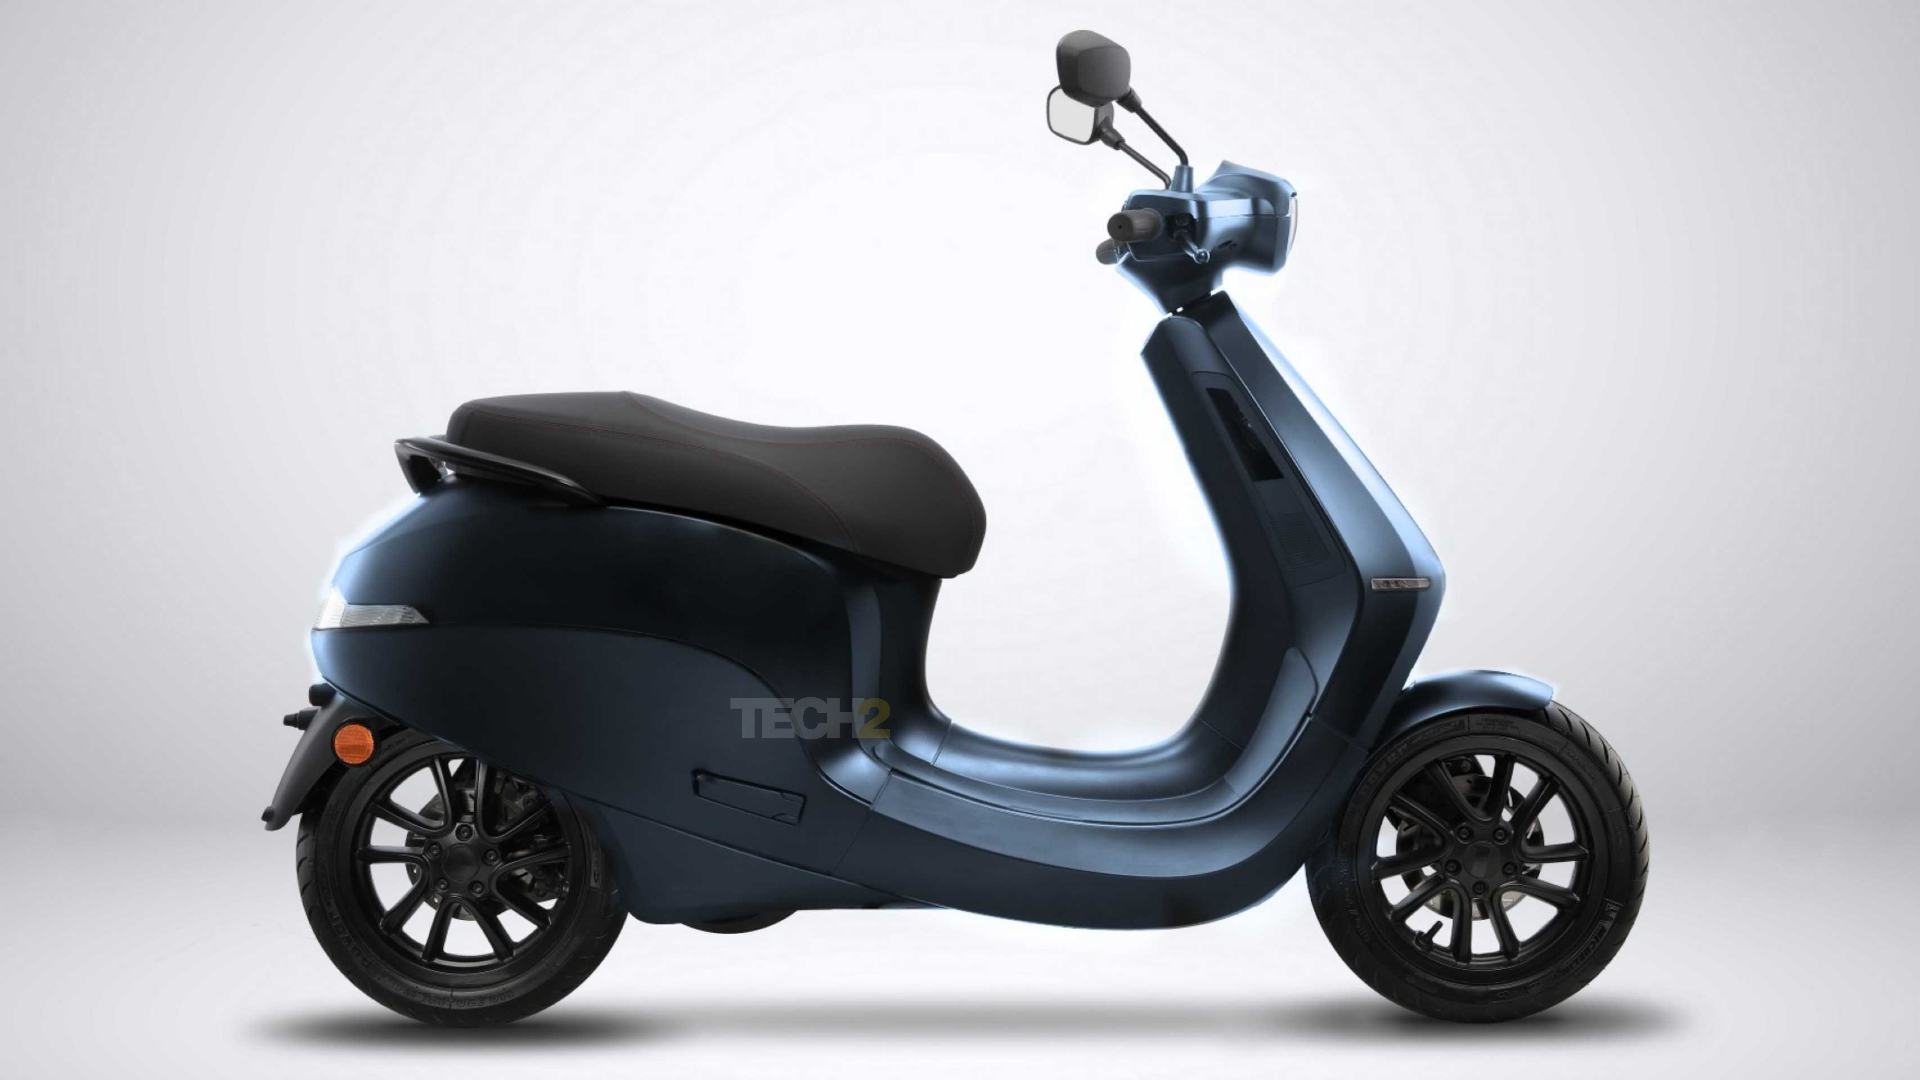 The Ola electric scooter is expected to available in three versions - Series S, S1 and S1 Pro. Image: Ola Electric/Tech2